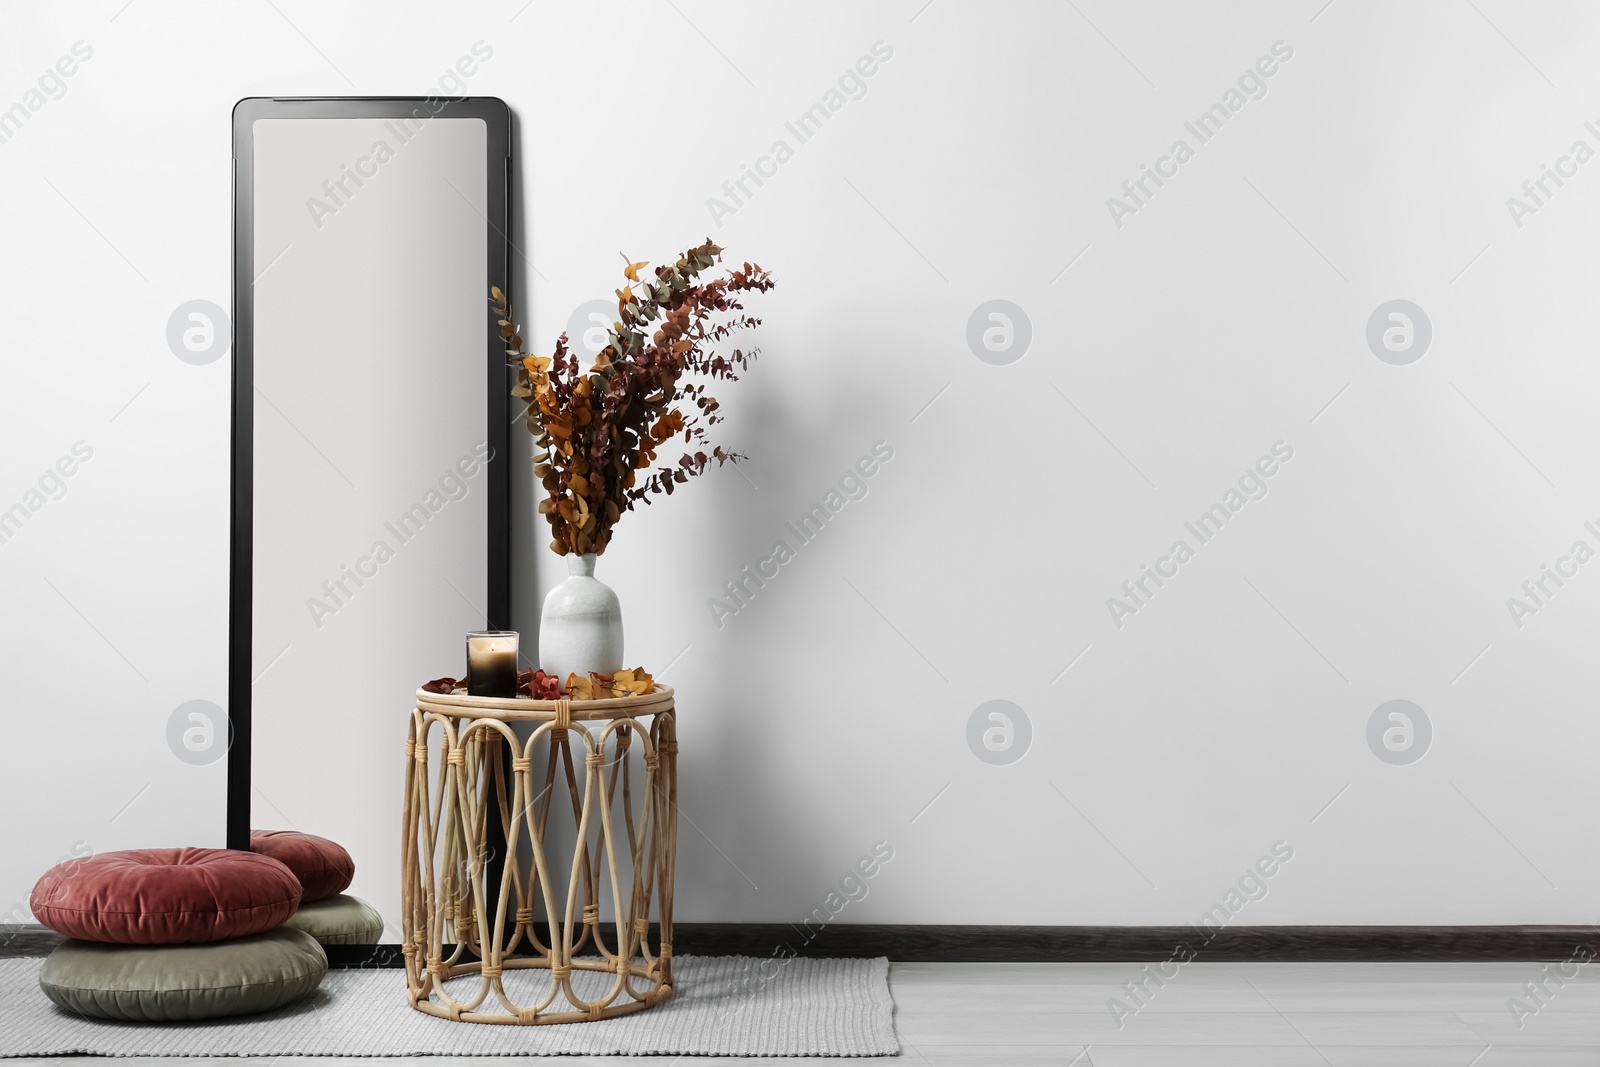 Photo of Table, mirror and pillows on floor near white wall, space for text